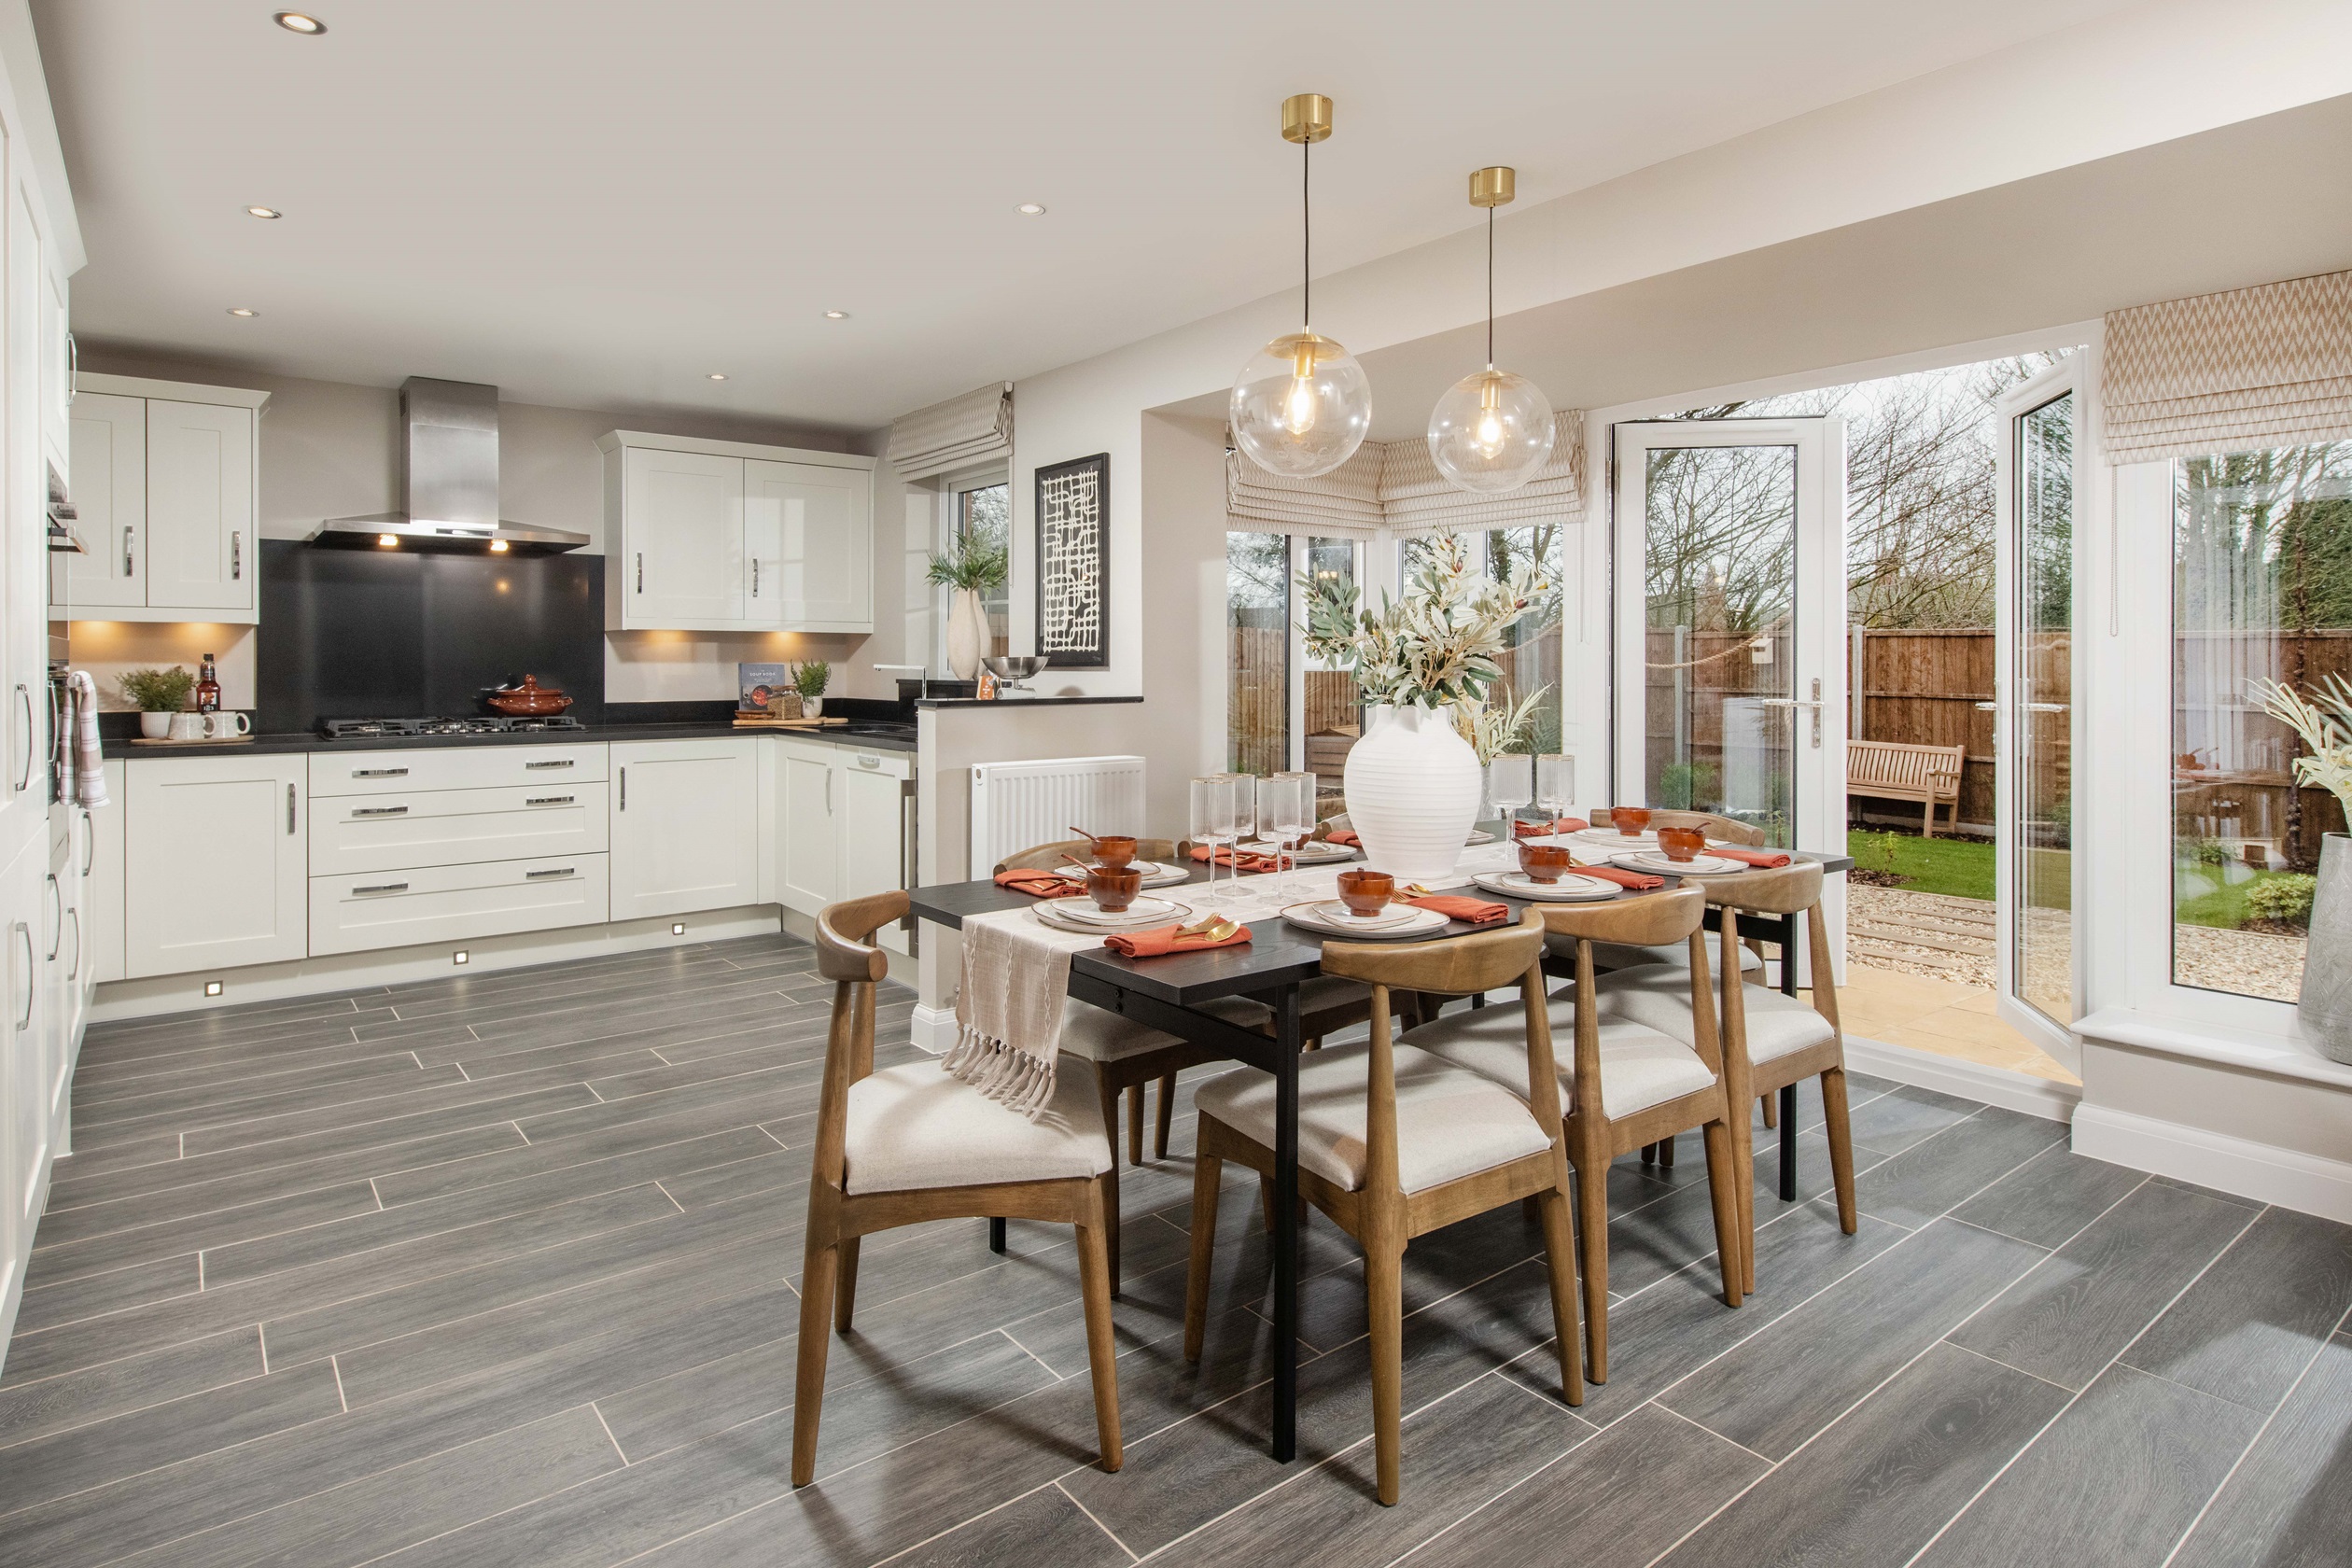 Property 1 of 10. Holden Kitchen-Diner With French Doors Open To The Garden